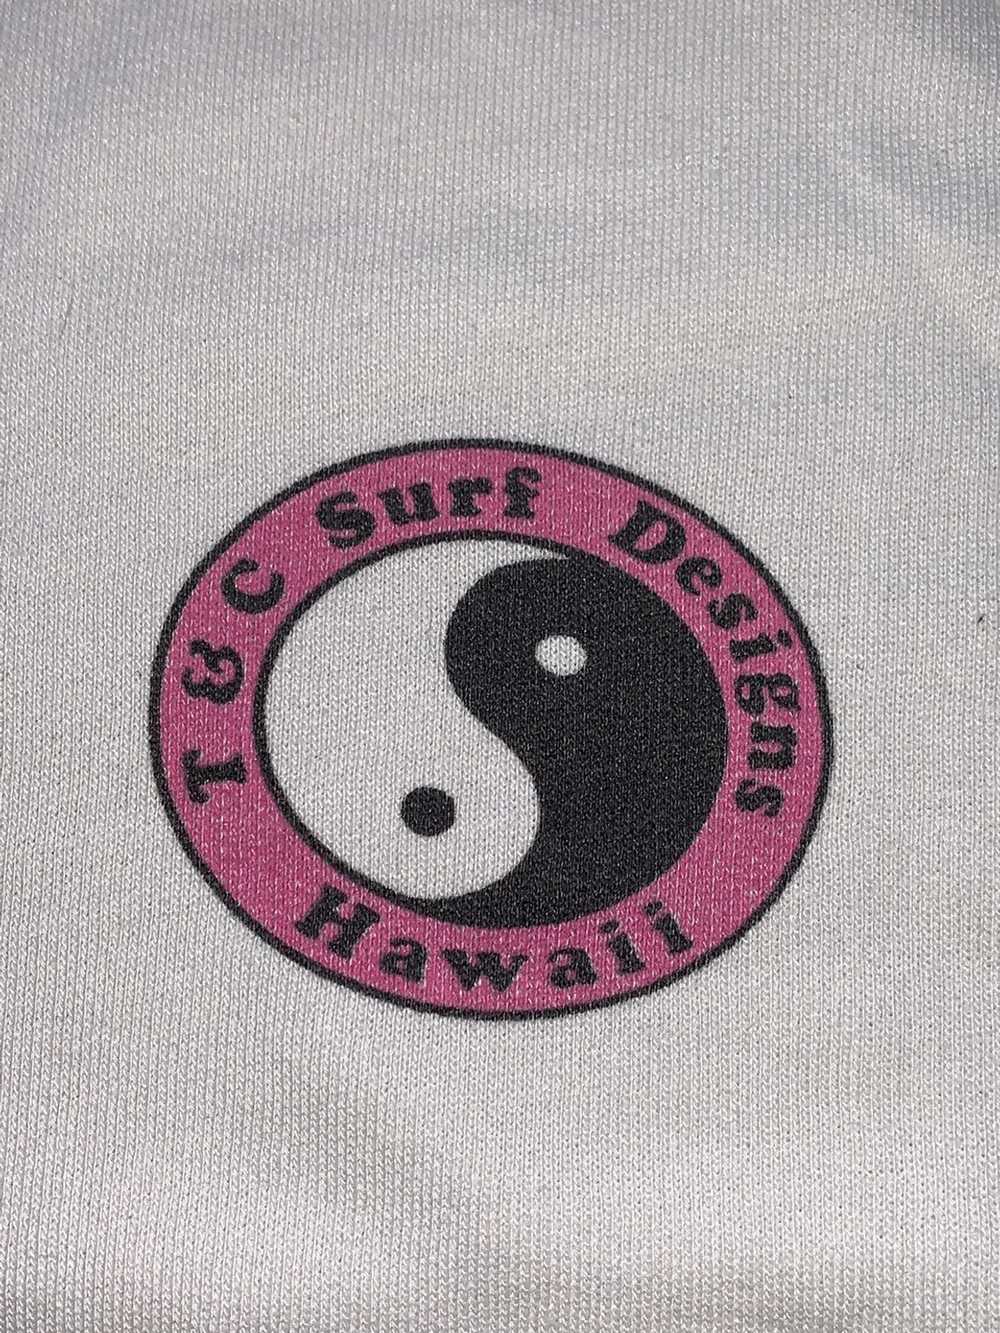 Japanese Brand × Surf Style × Vintage TOWN & COUN… - image 5